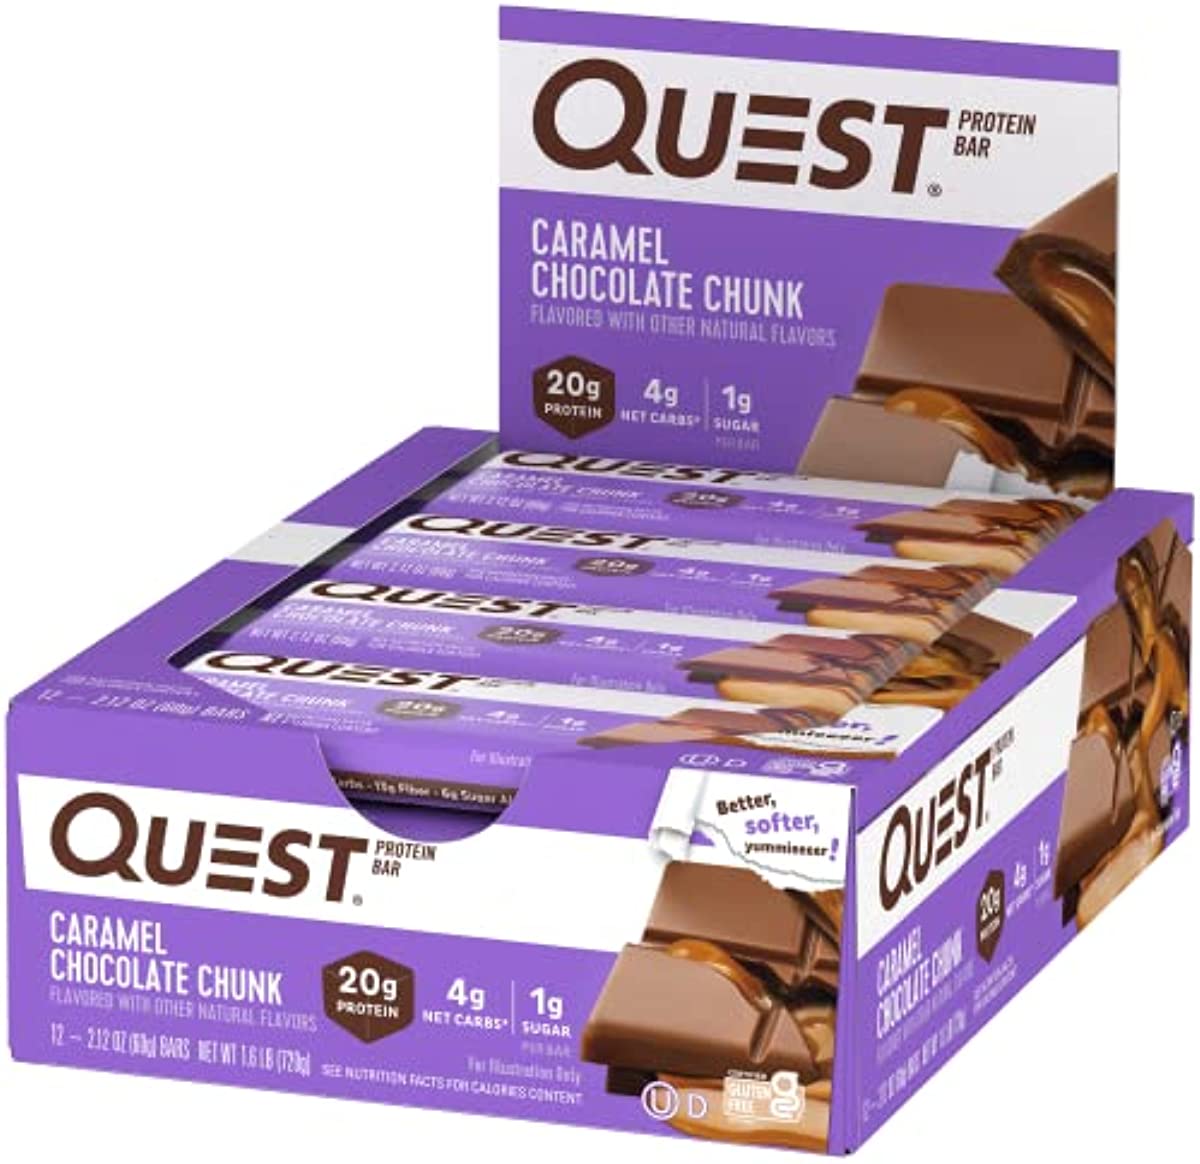 Quest Nutrition Caramel Chocolate Chunk Protein Bars, High Protein, Low Carb, Gluten Free, Keto Friendly, 12 Count